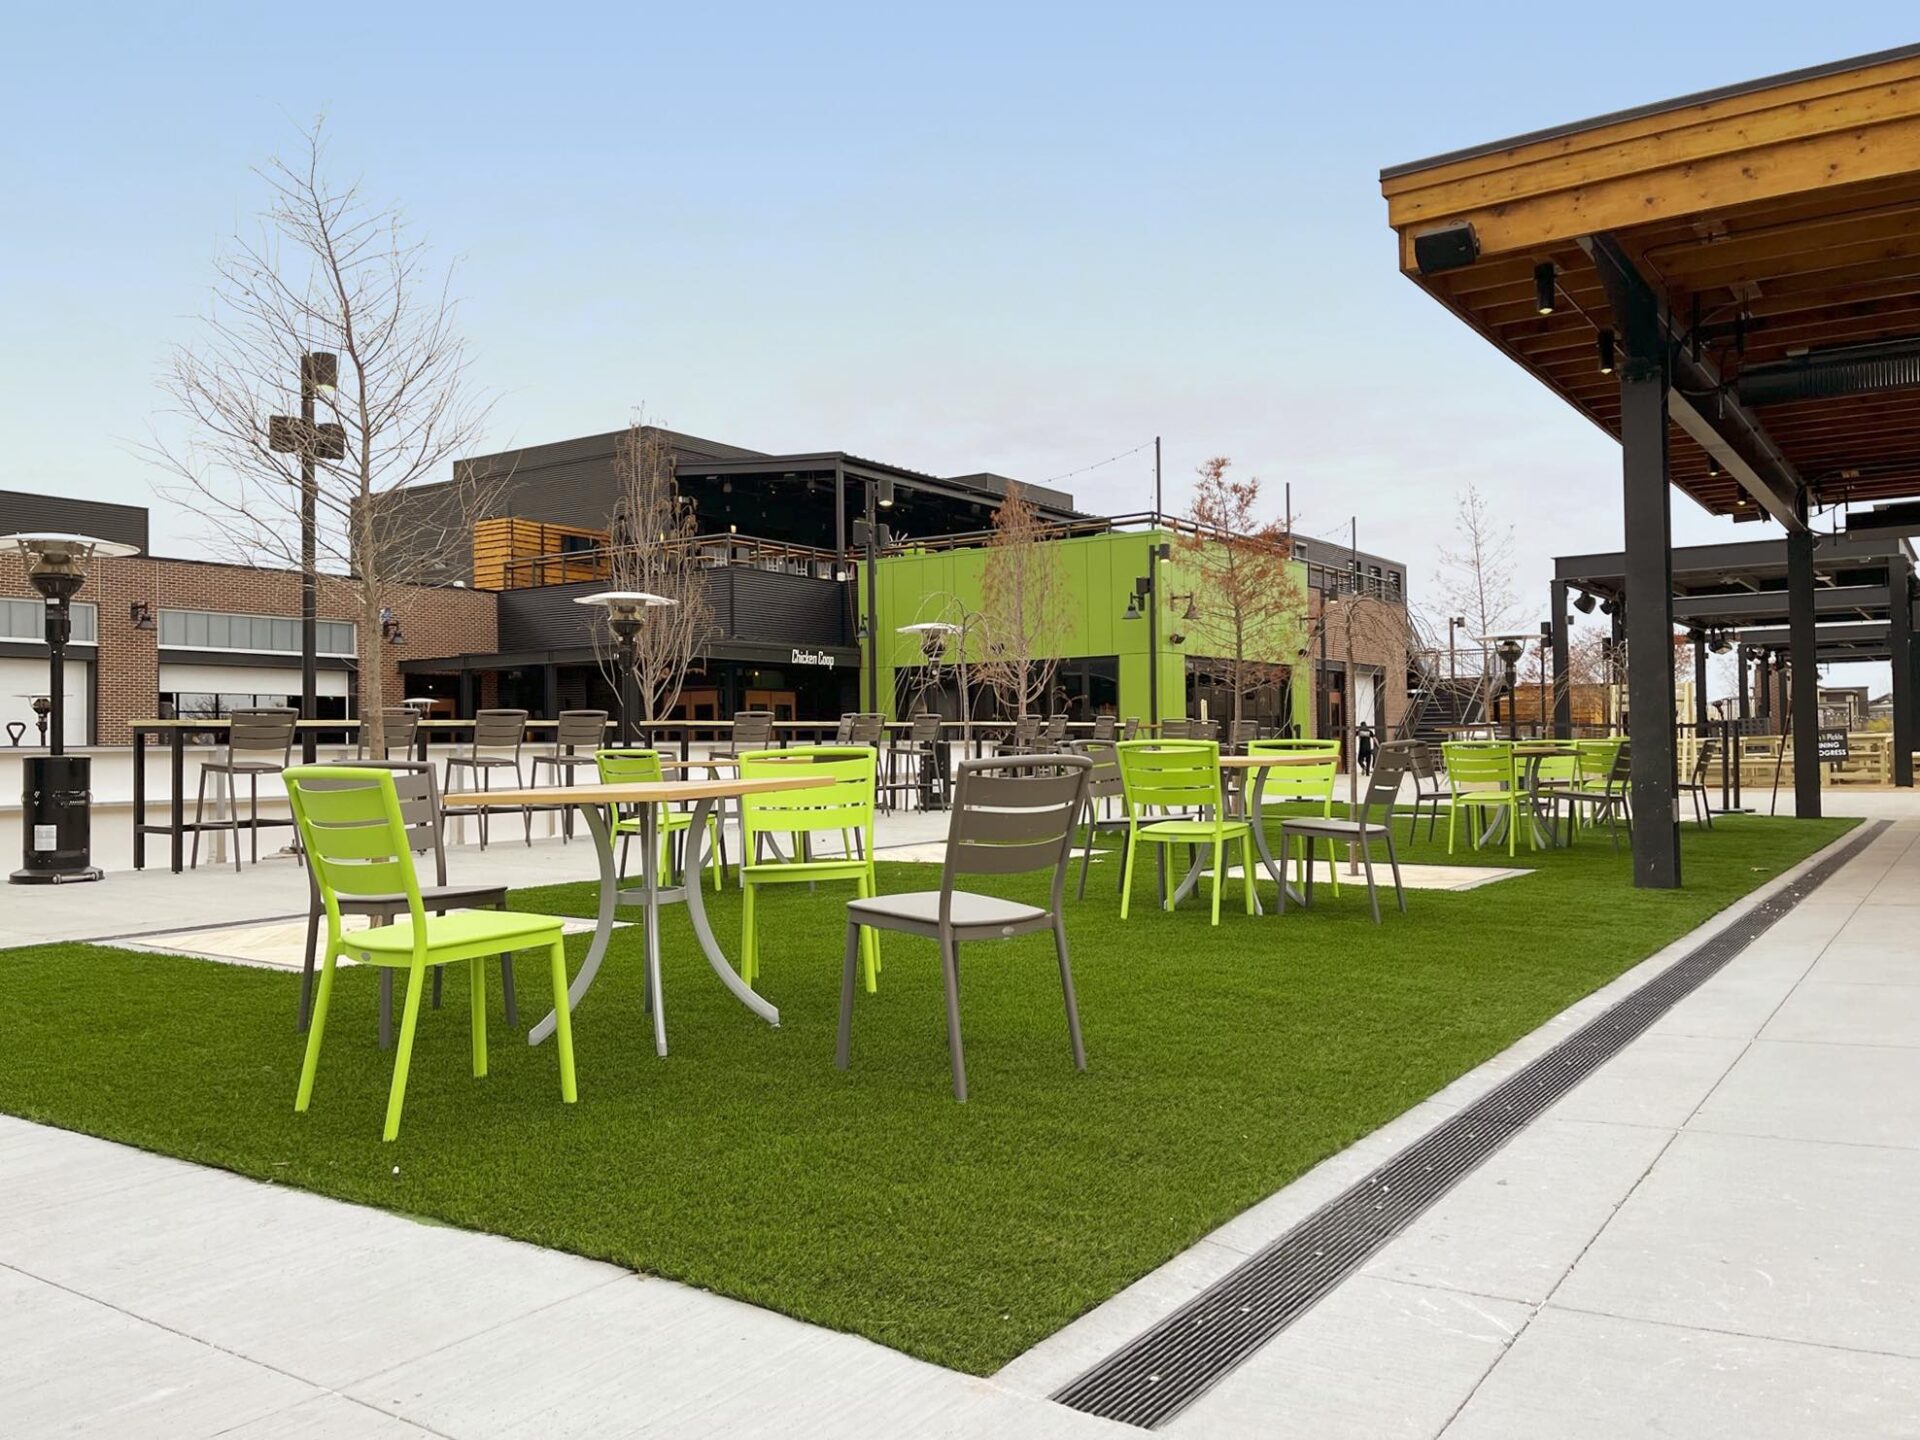 Outdoor dining area with vibrant green chairs and tables on synthetic grass, modern buildings in the background, and bare trees under a clear sky.